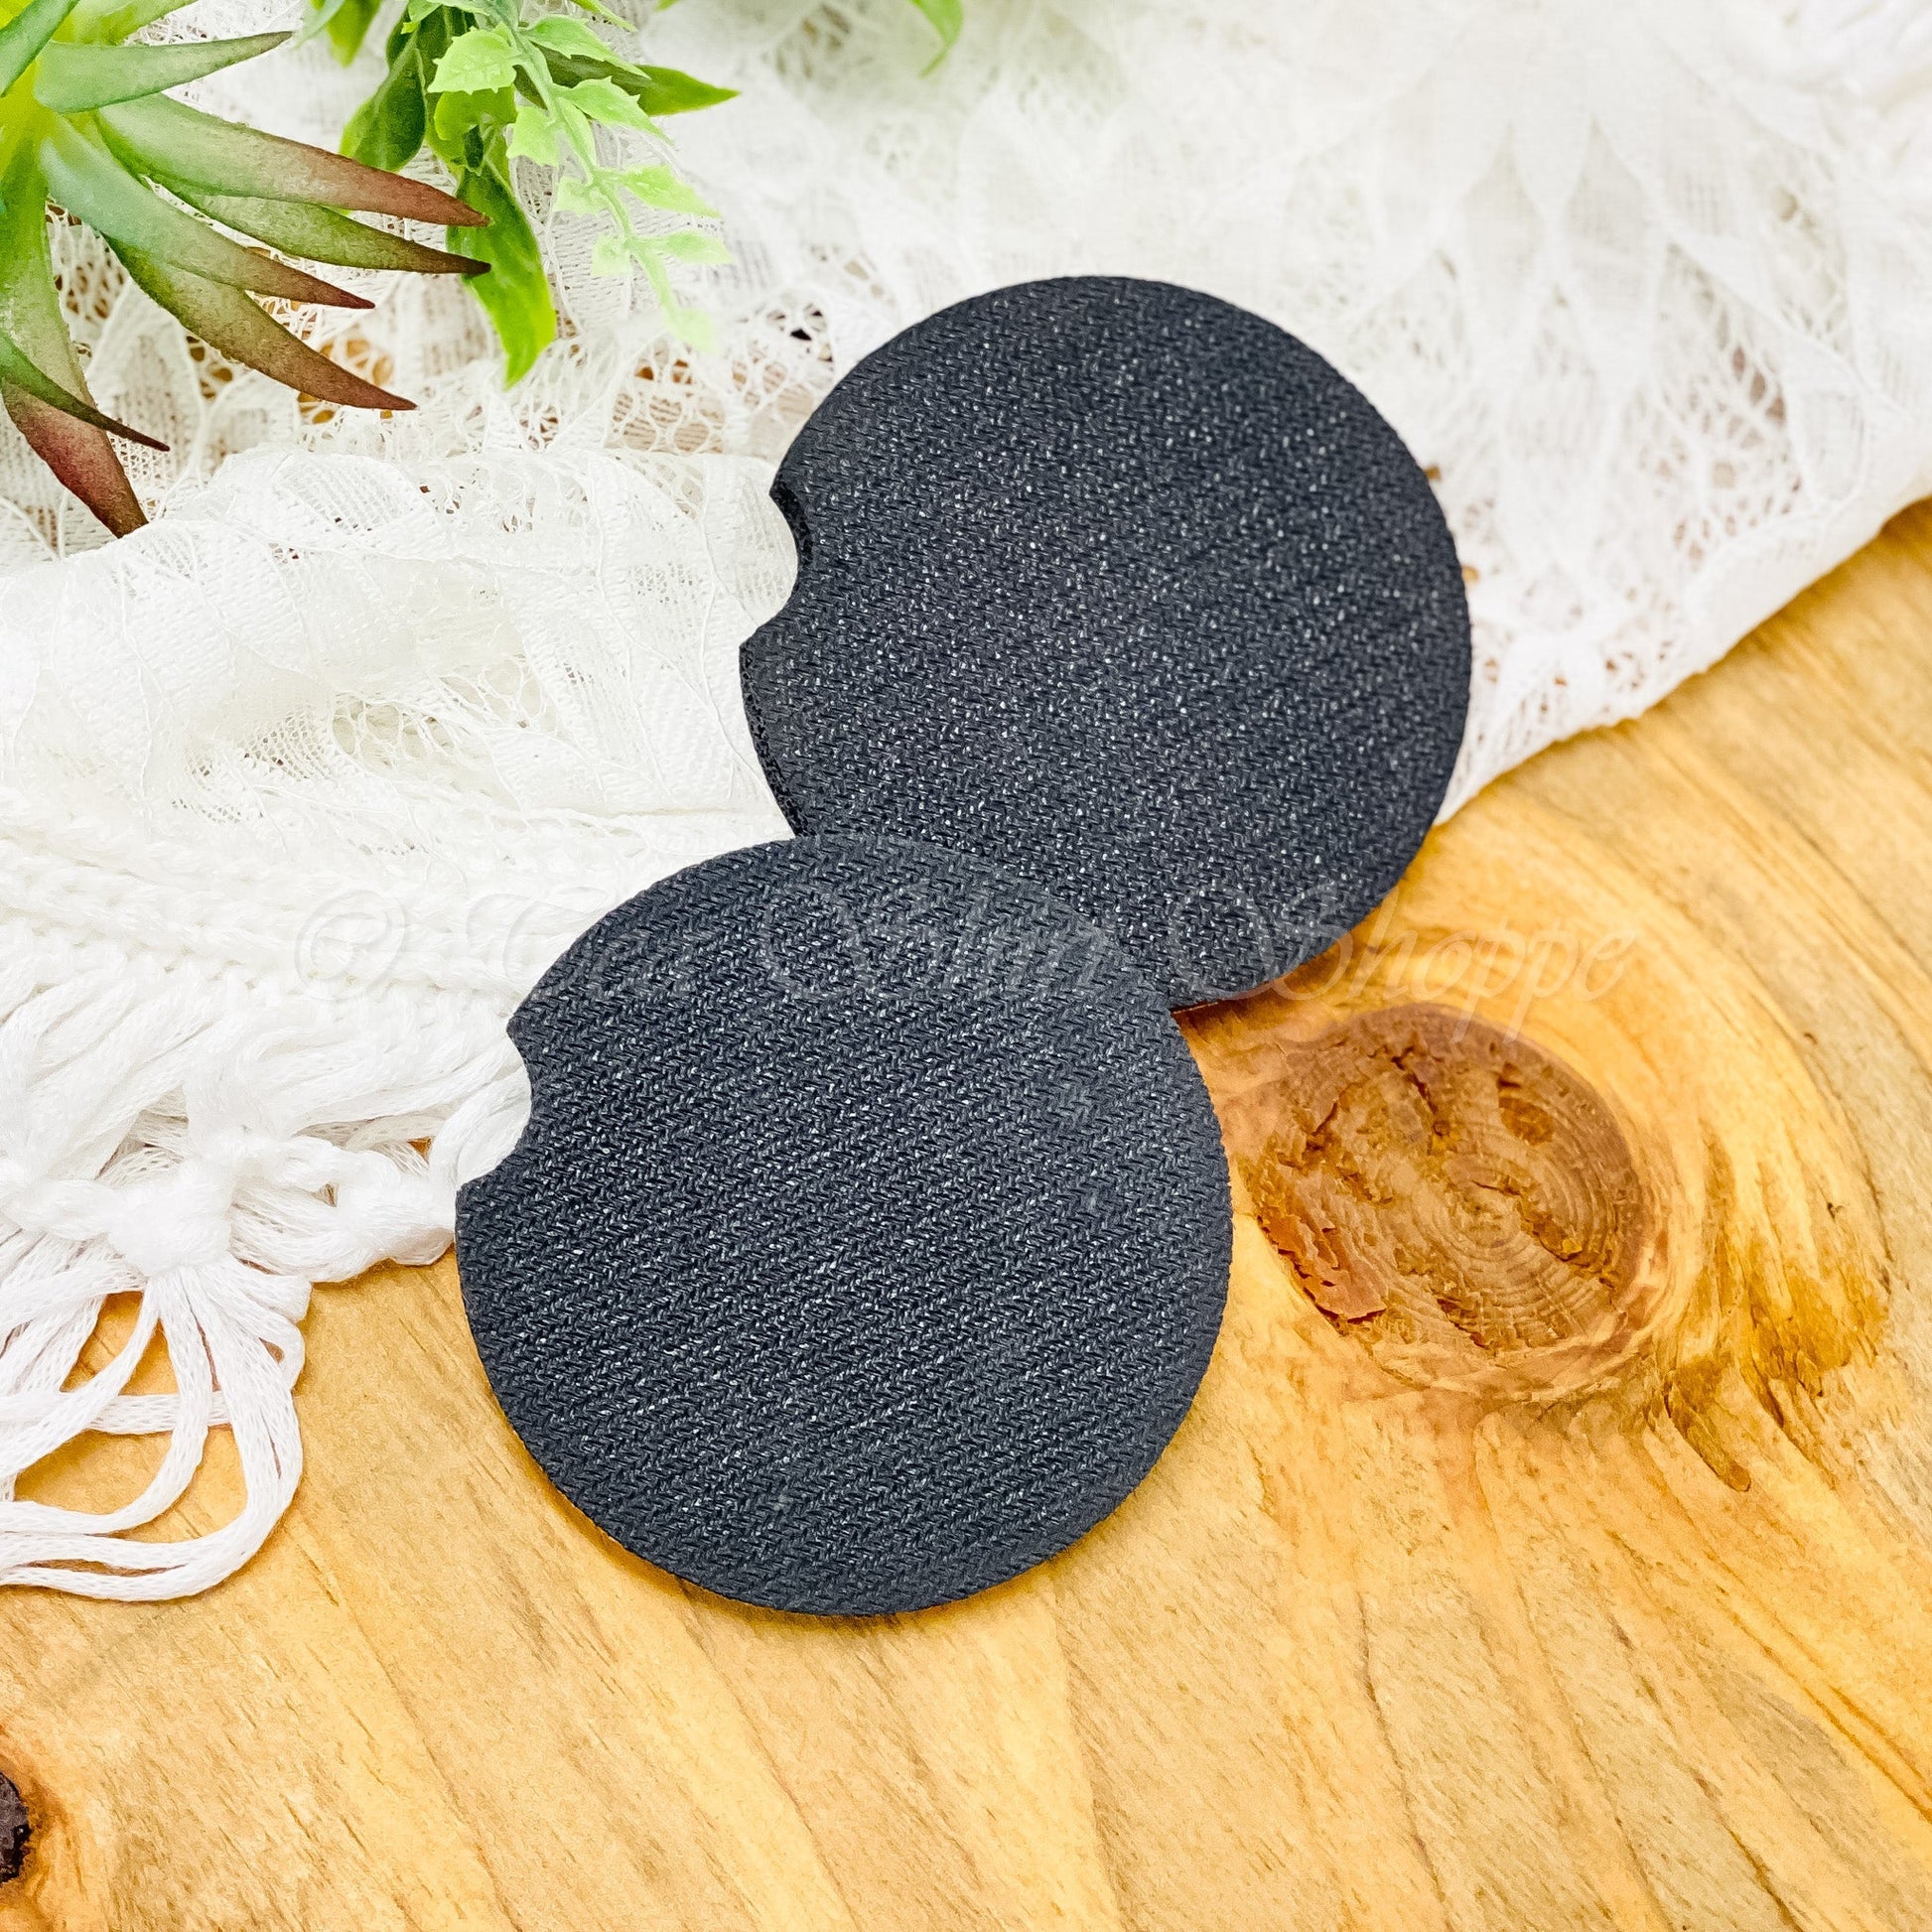 Measuring at just .25 inches in height and 2.5 inches in diameter, these coasters are compact yet highly effective. The absorbent Neoprene material is specially chosen to quickly absorb condensation from your cups, preventing any drips or leaks from reaching your car surfaces.